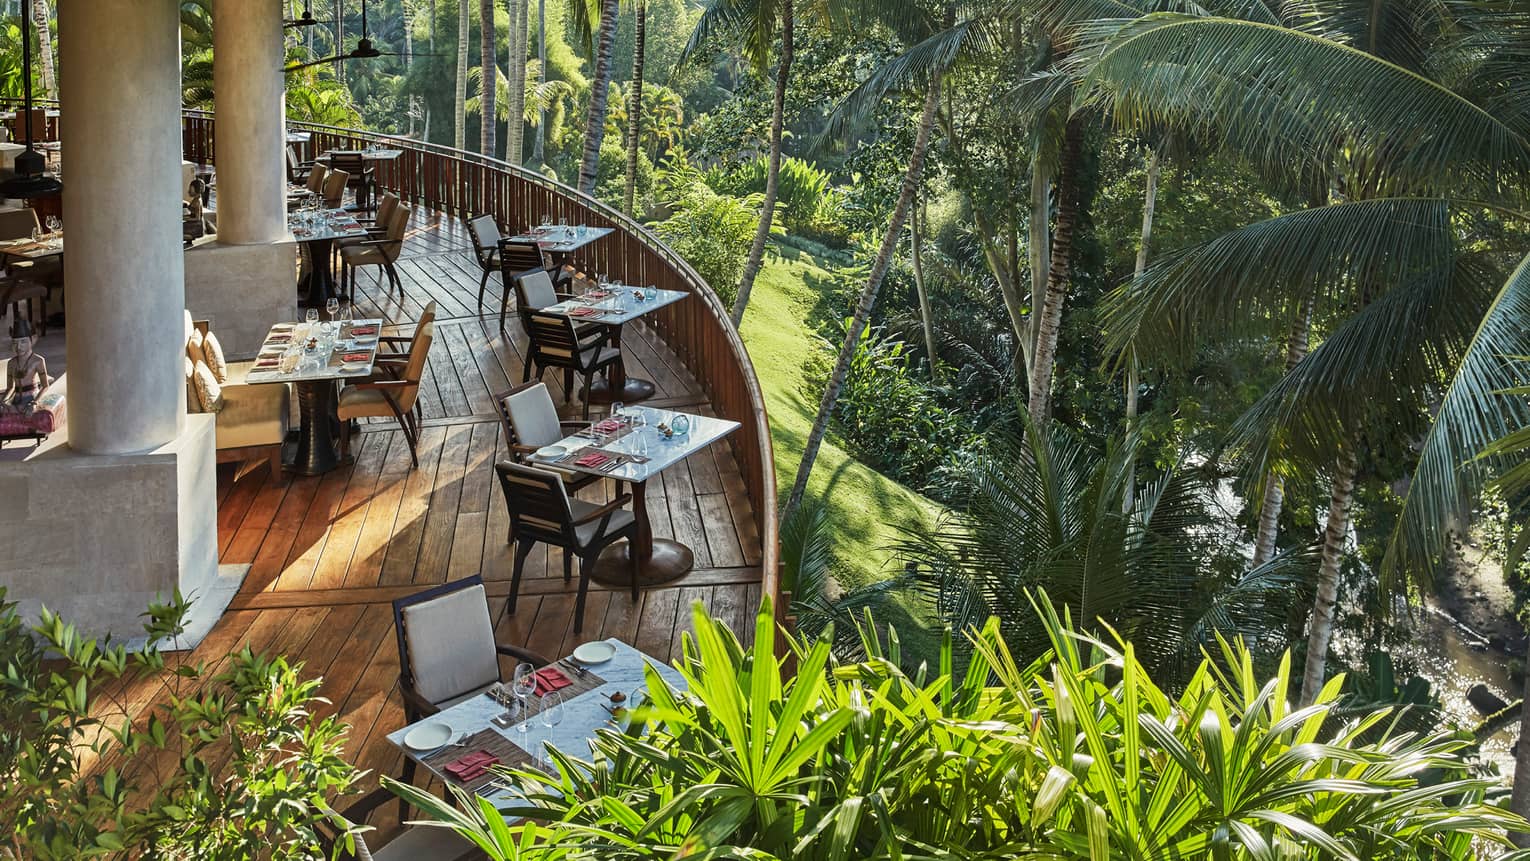 Looking down at curved wood patio of Ayung Terrace outdoor dining room, tables and chairs overlooking palm trees, forest